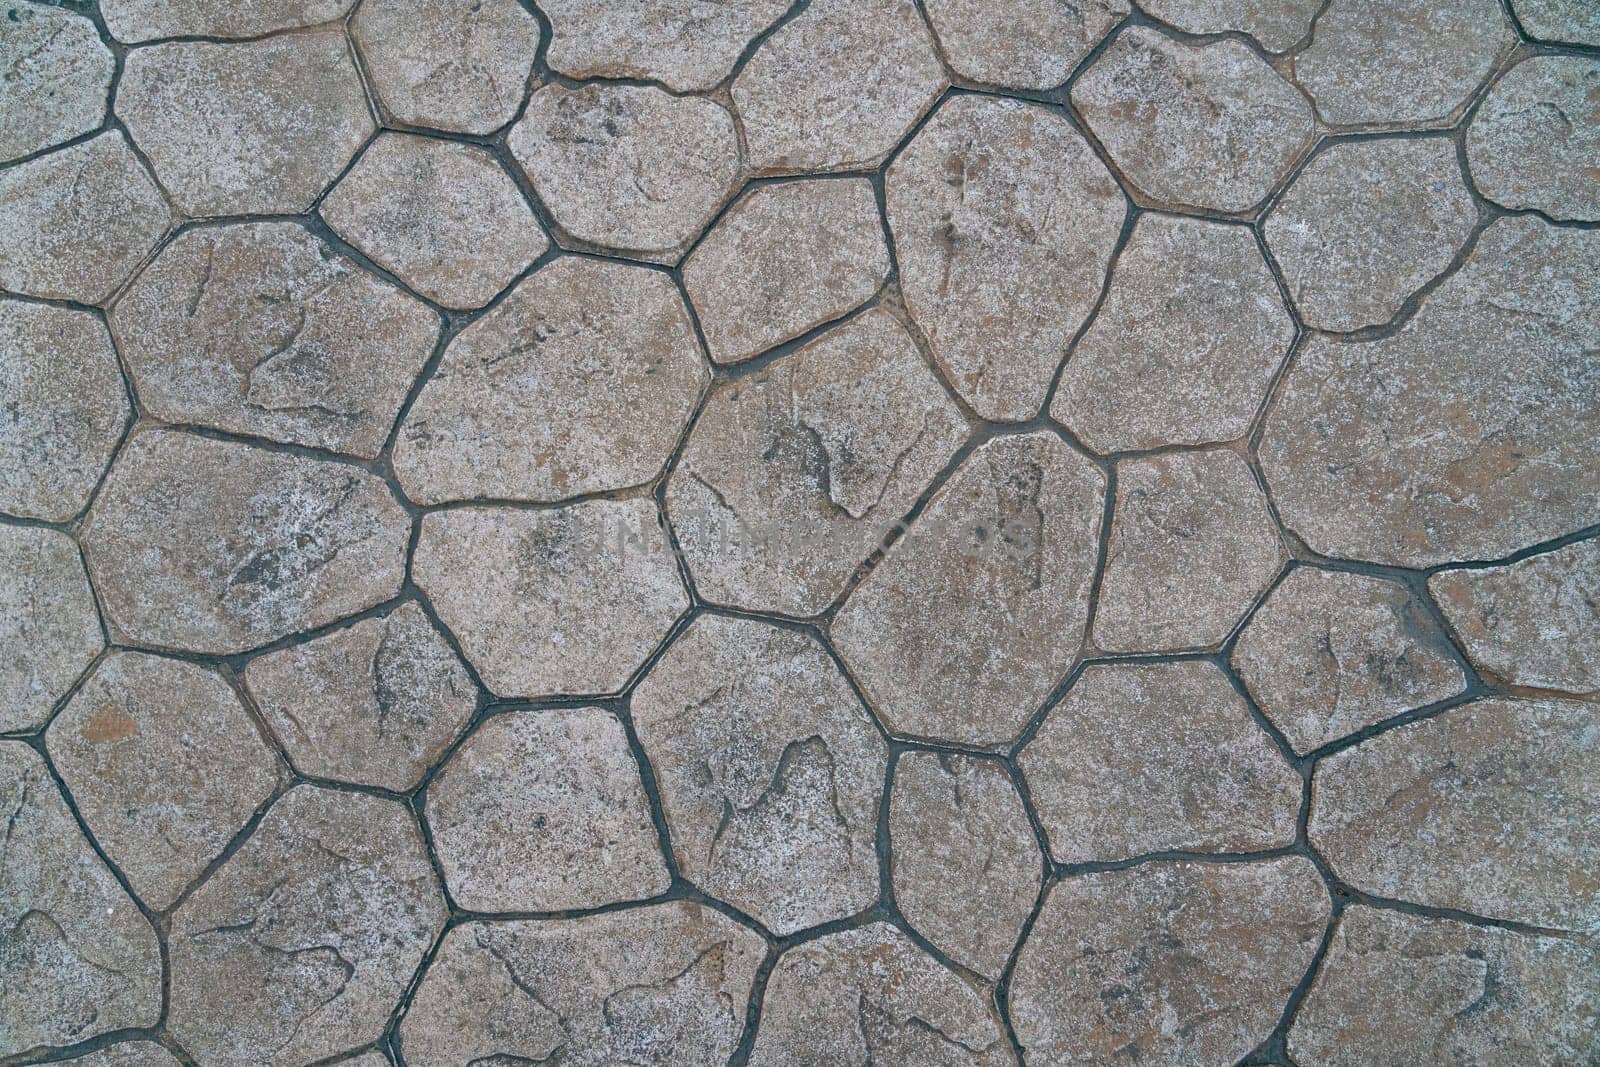 stonework with paving stones as a background by roman112007